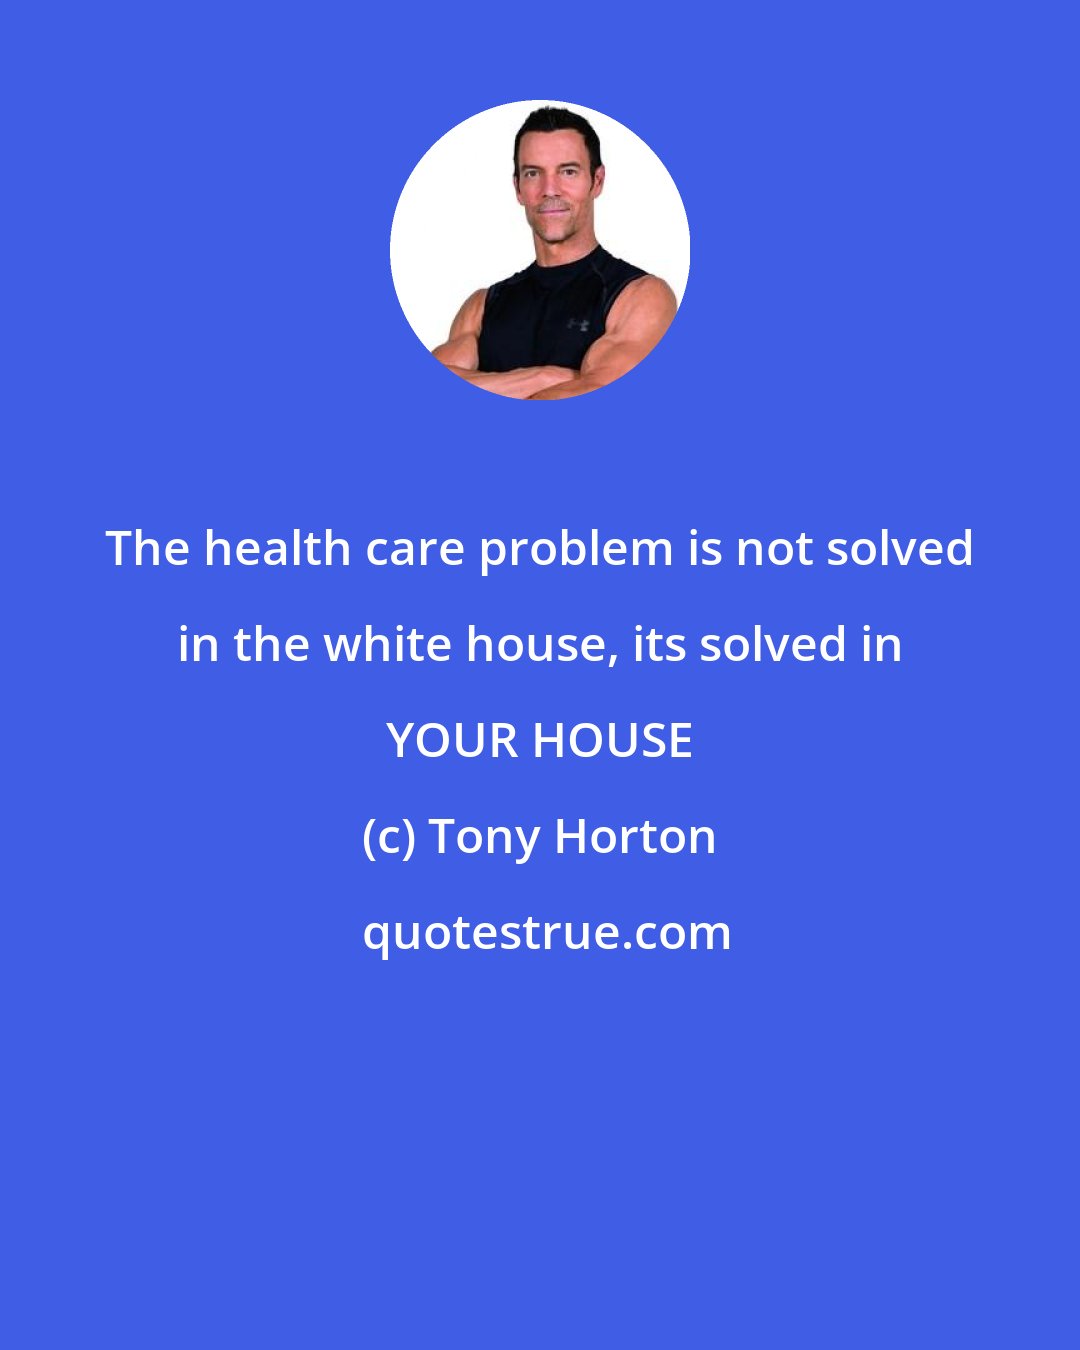 Tony Horton: The health care problem is not solved in the white house, its solved in YOUR HOUSE